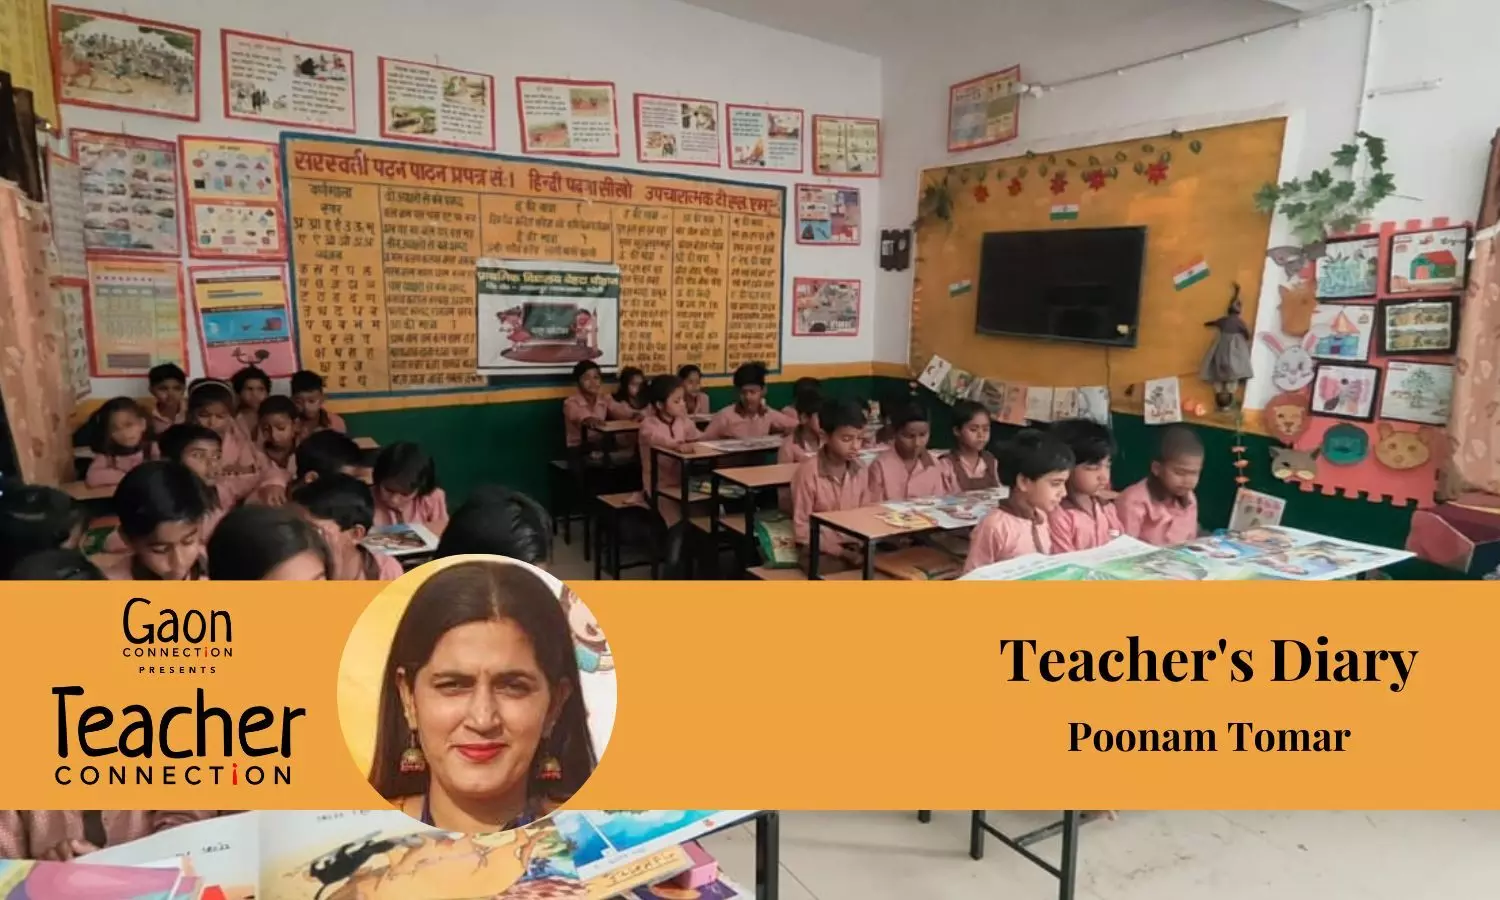 Teacher’s Diary: Journey of a teacher who reformed her school with support from students